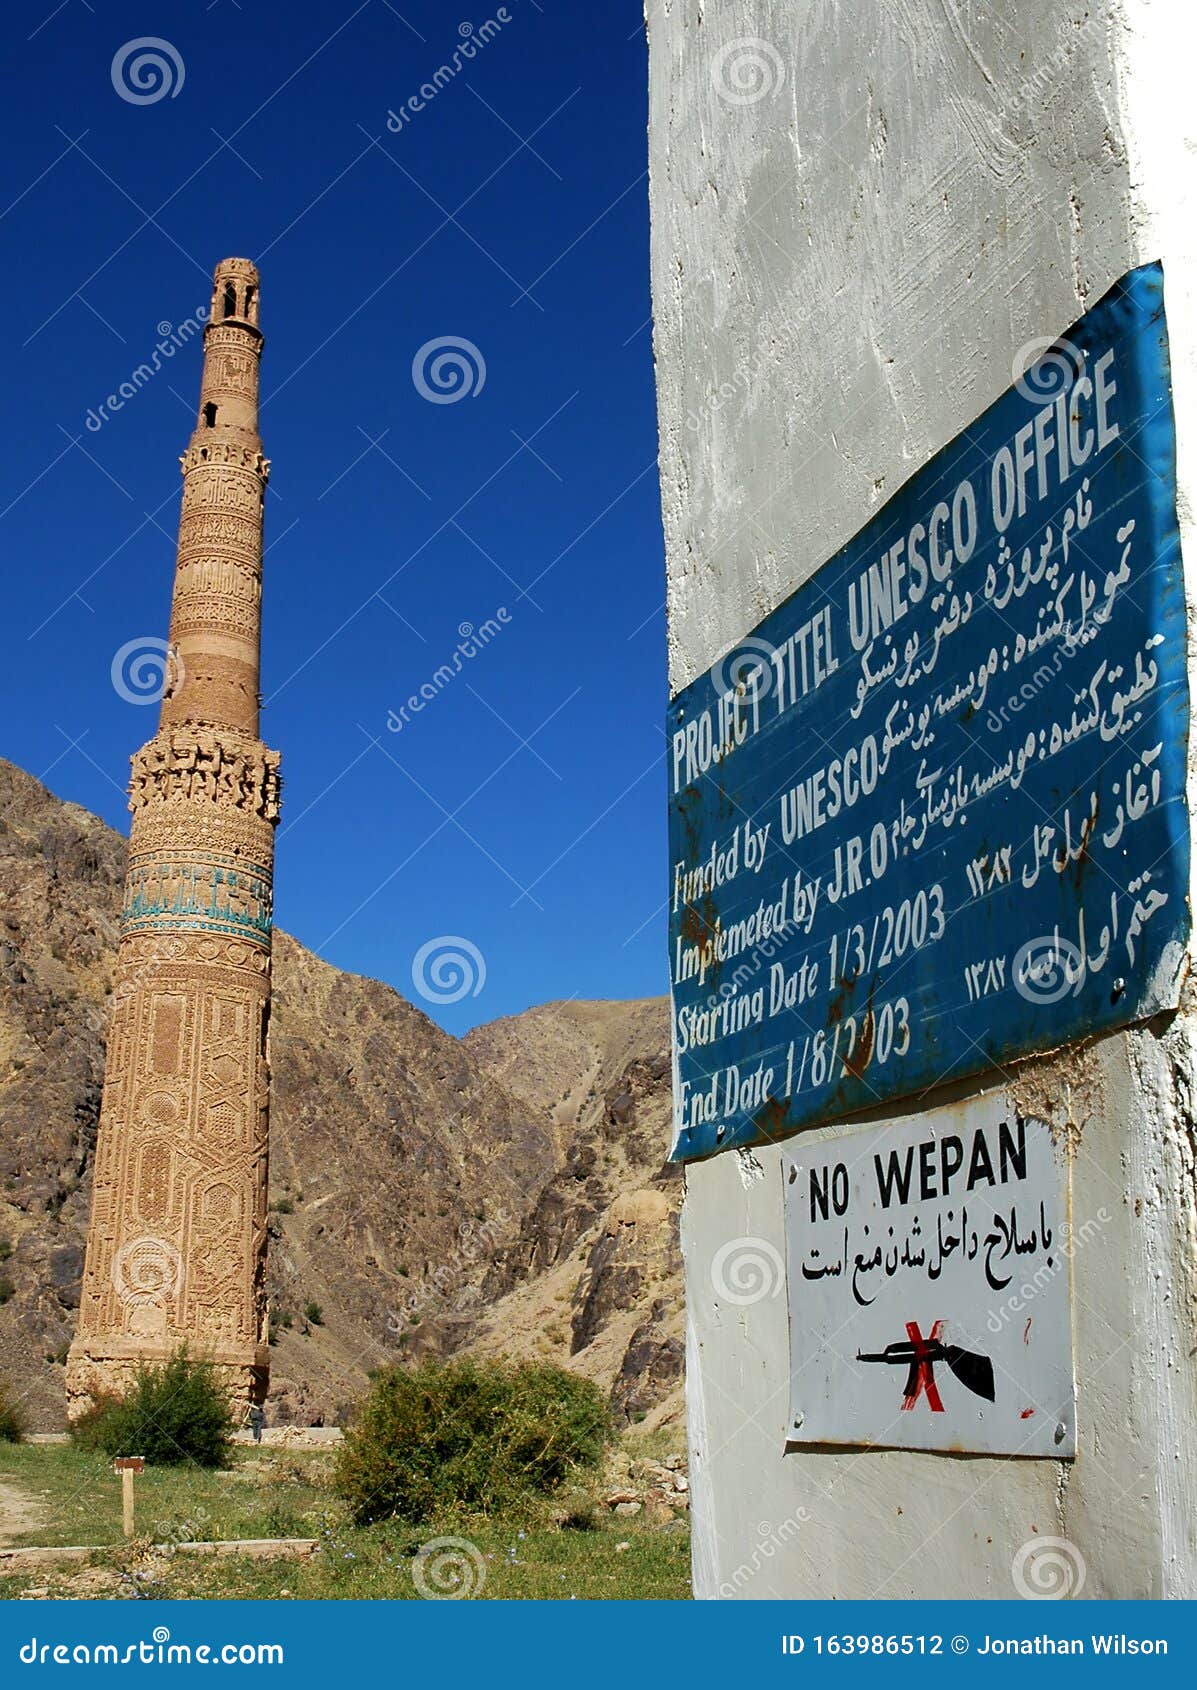 the minaret of jam, a unesco site in central afghanistan. showing unesco sign.